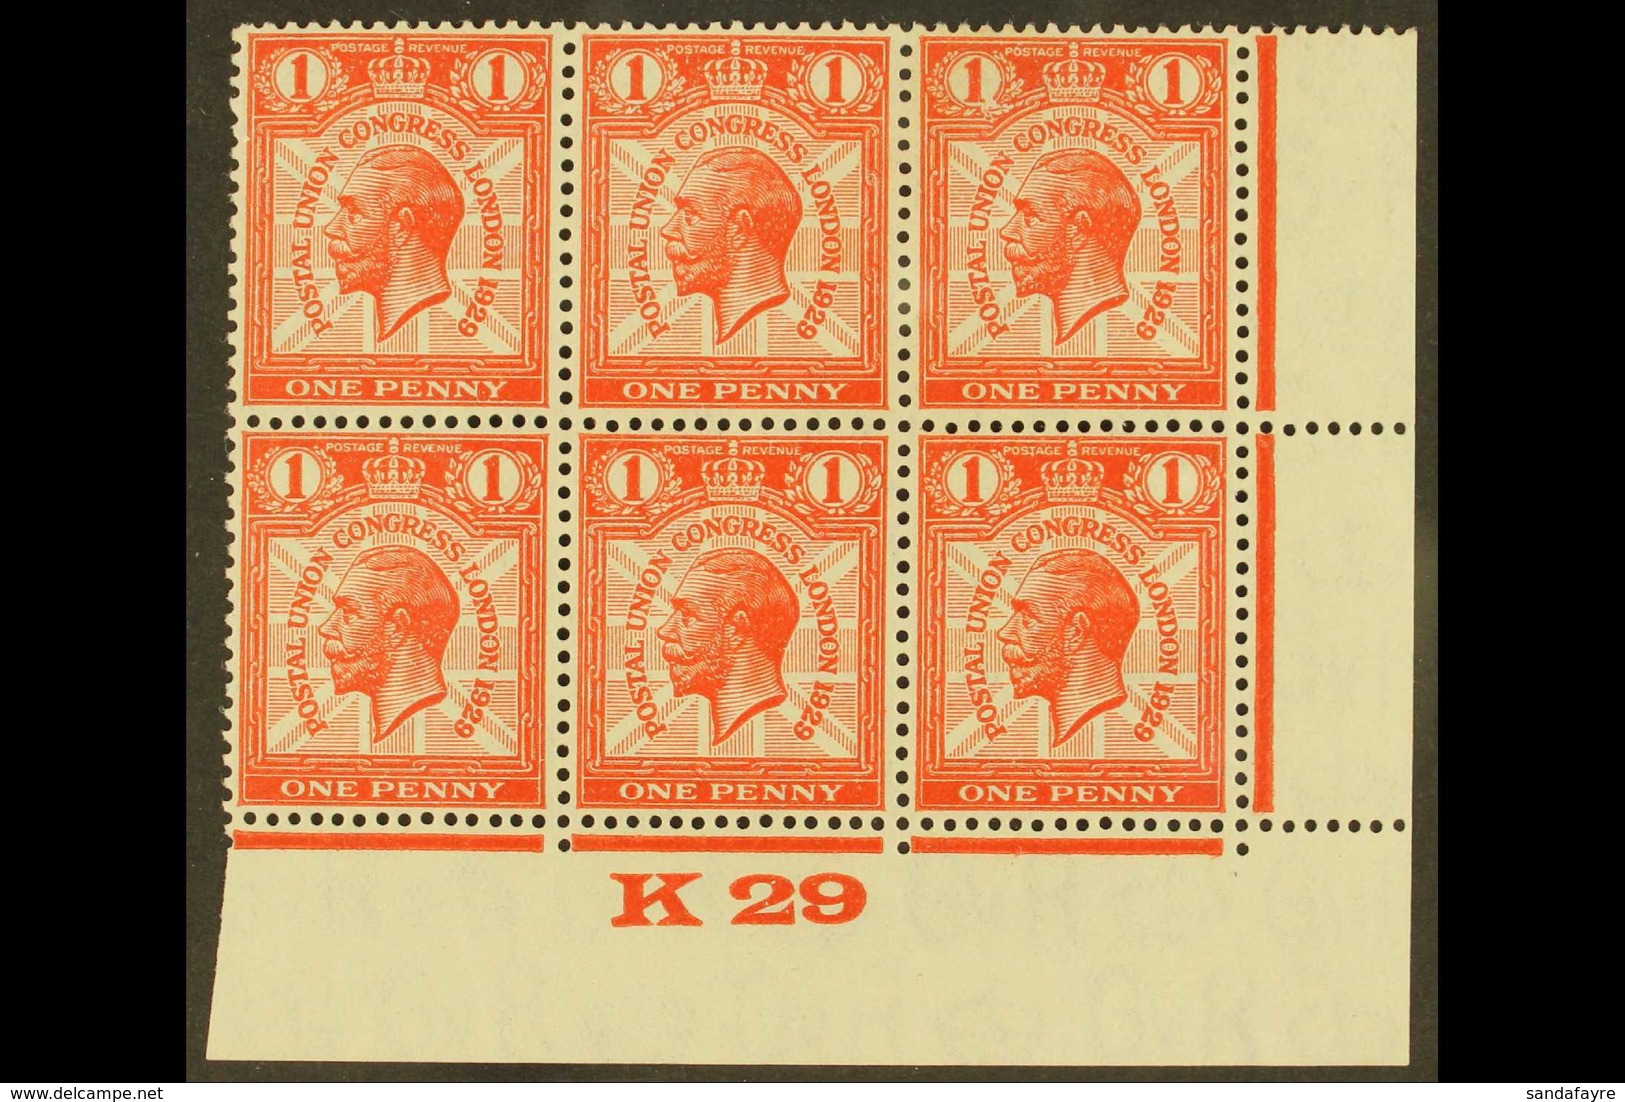 1929 1d Scarlet Universal Postal Union BROKEN WREATH AT LEFT Variety (Pl. 4, R. 19/12), SG Spec NCom6d, Within Lower Rig - Unclassified